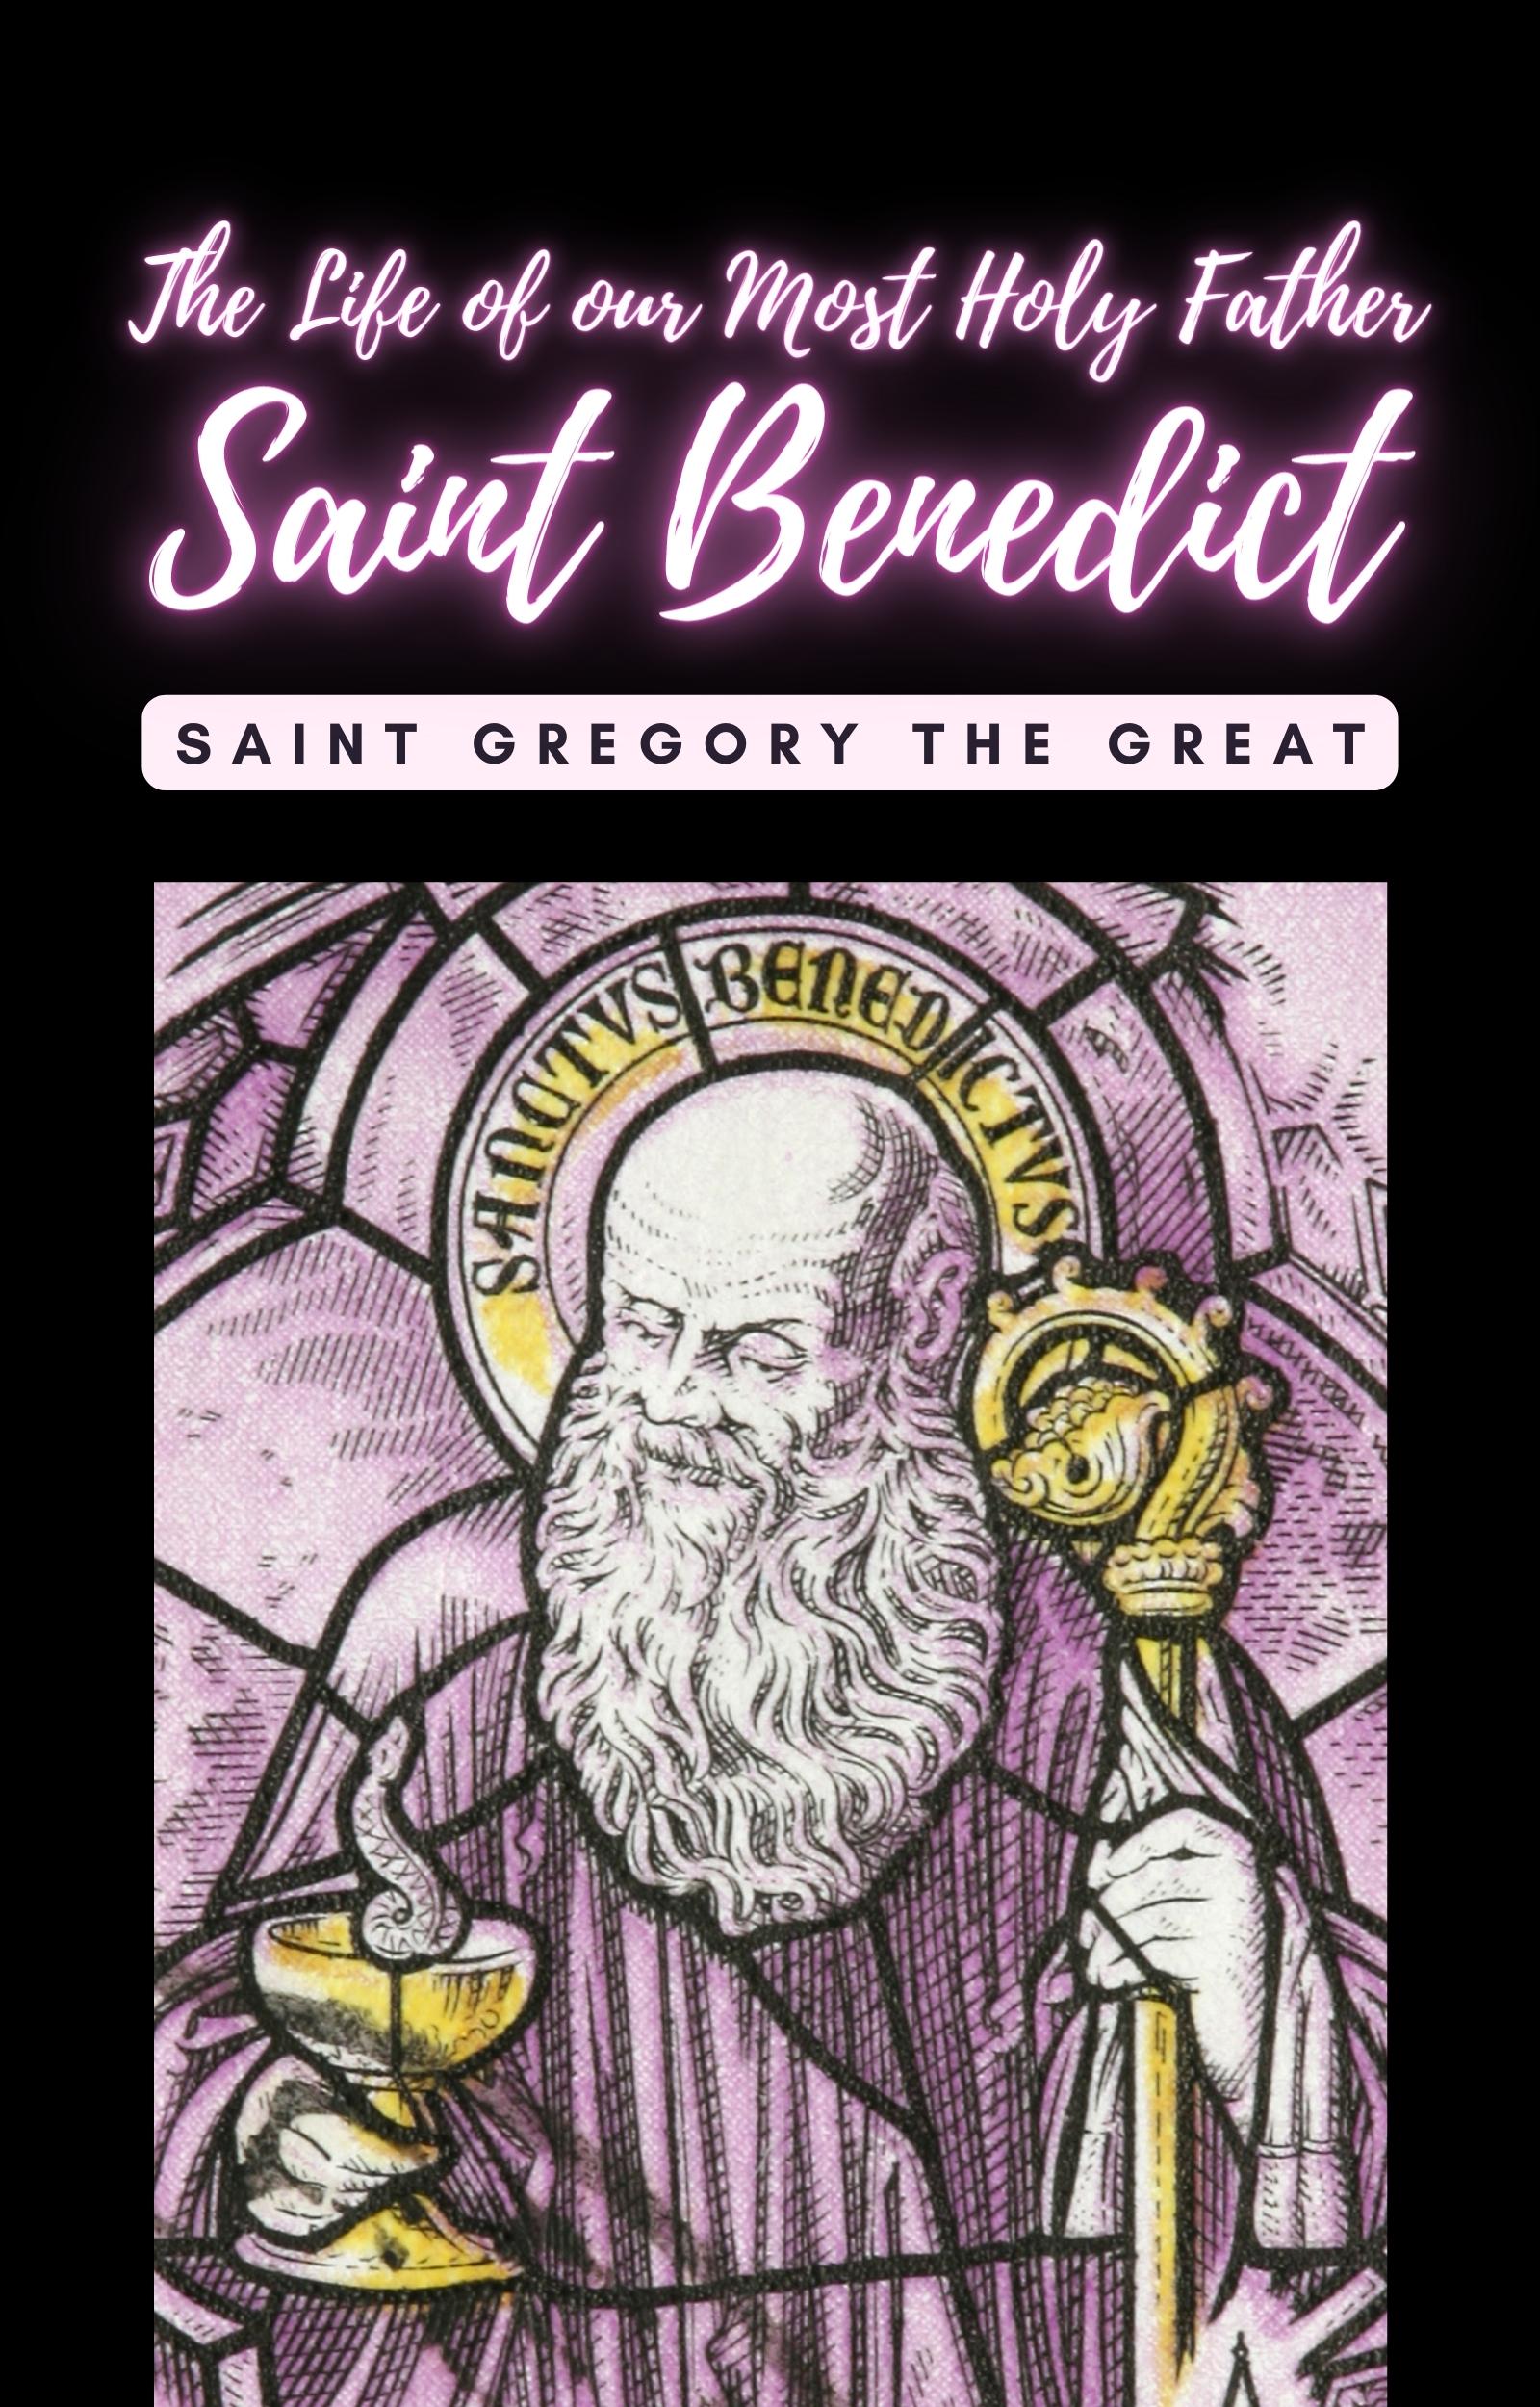 The life of our Most Holy Father Saint Benedict